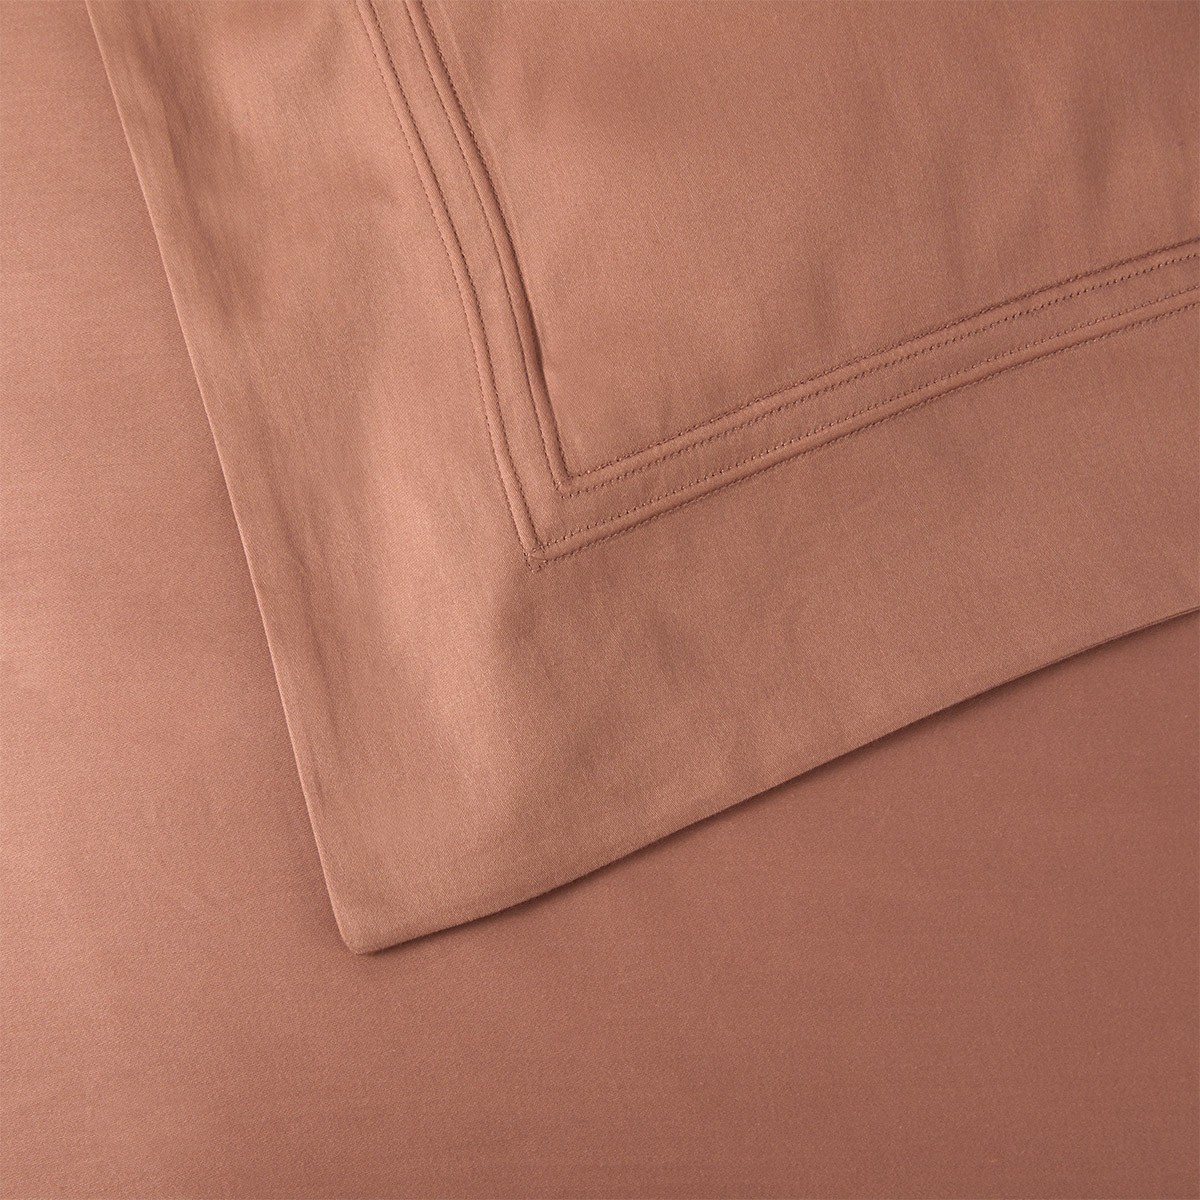 Yves Delorme Utopia - Luxury 300 thread count Duvet Cover - Yves Delorme  Outlet